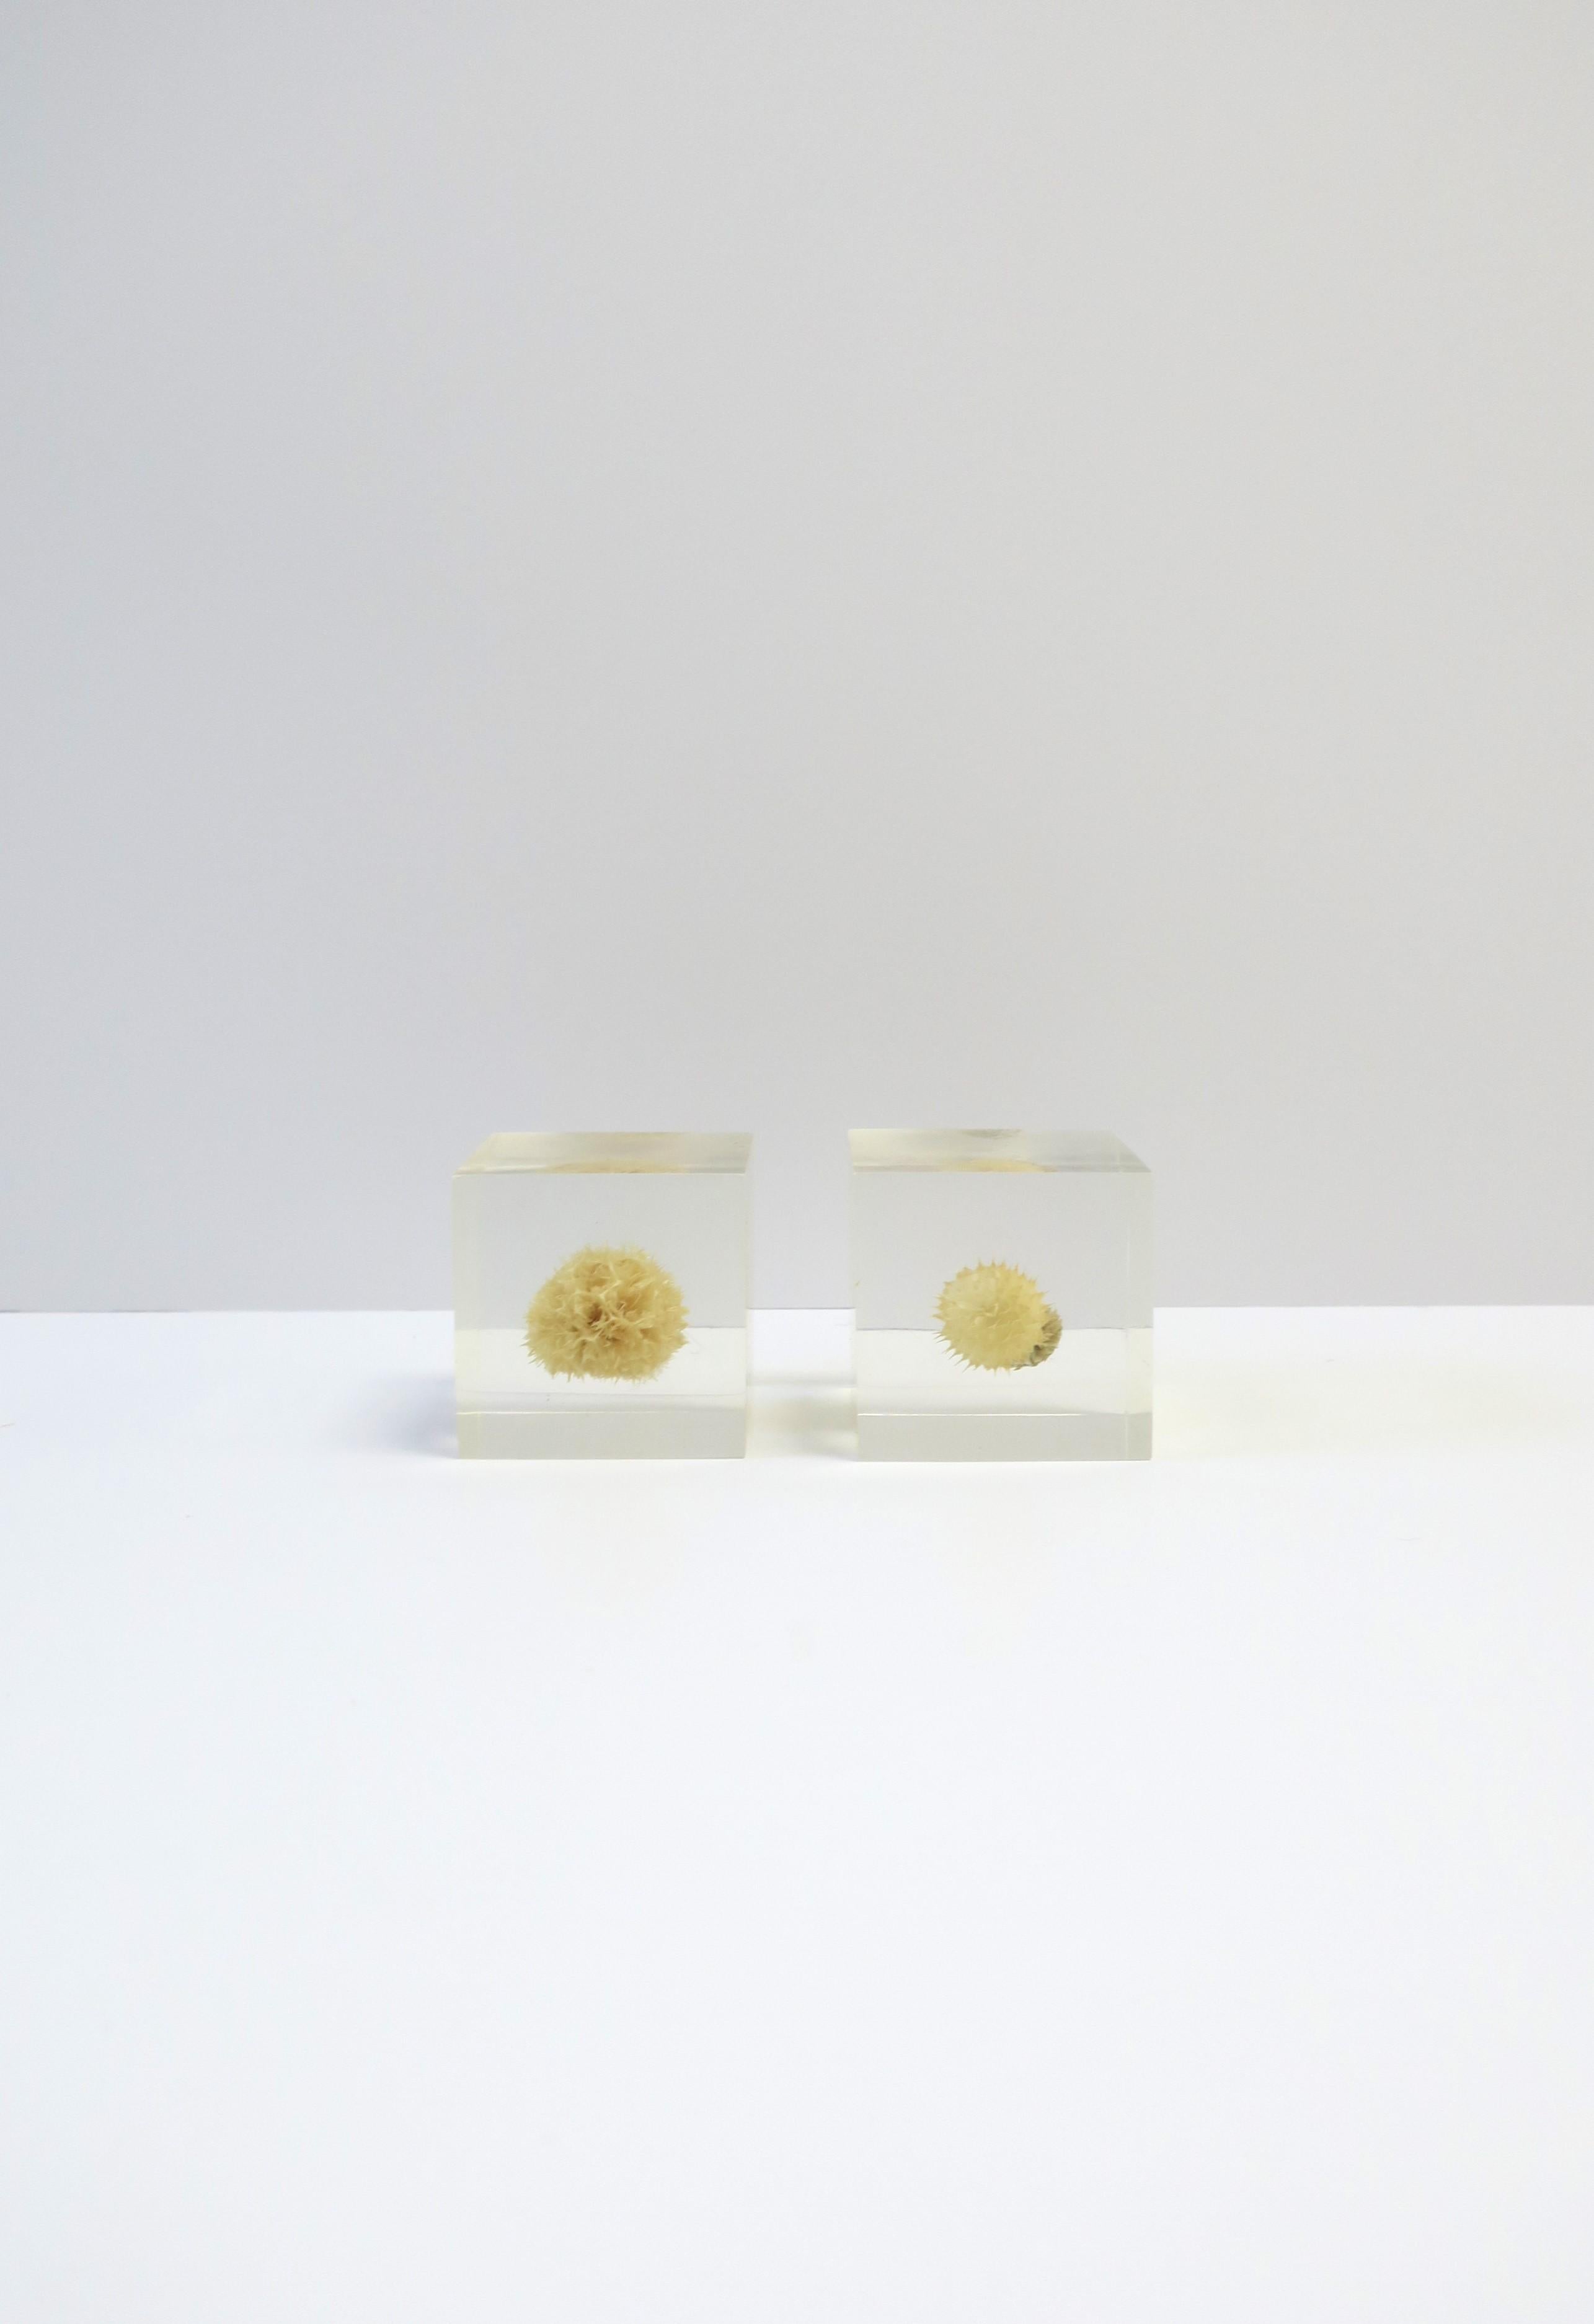 A set of two (2) Organic Modern Lucite flower bud cubes decorative objects in the style of French designer Pierre Giraudion, circa 20th century. A great set that's just enough to add a special touch on a table, desk, office, library, etc. Just shy